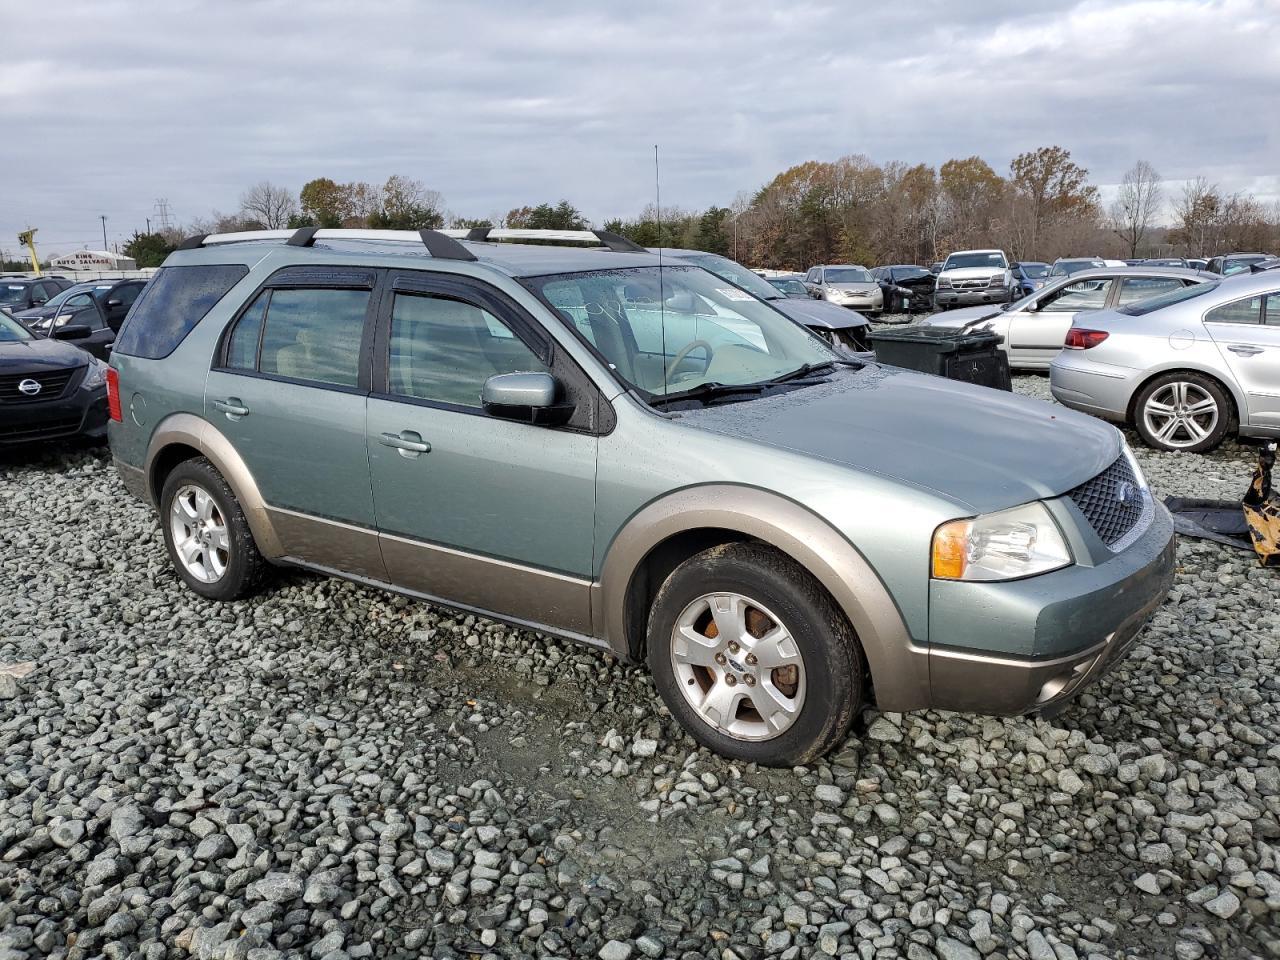 Used 2006 FORD FREESTYLE DETAILS - Pick N Save